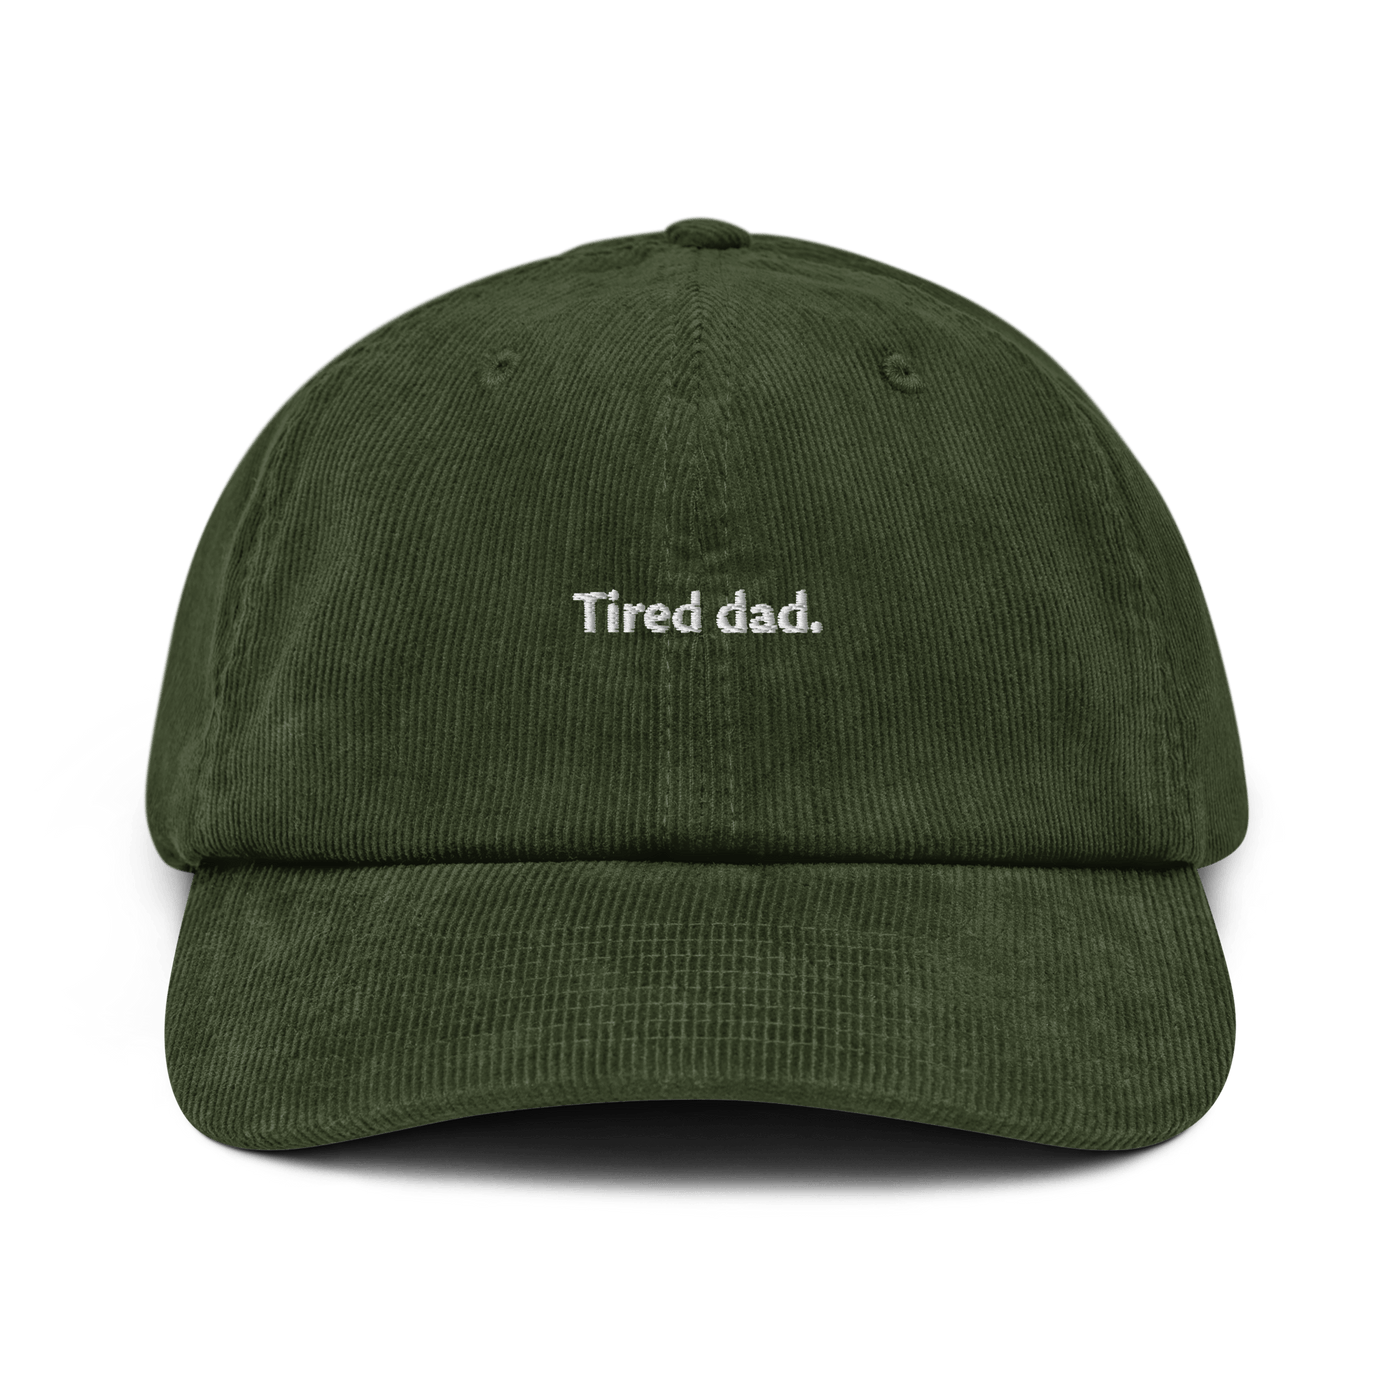 Tired dad Corduroy hat - Dark Olive - - Just Another Cap Store